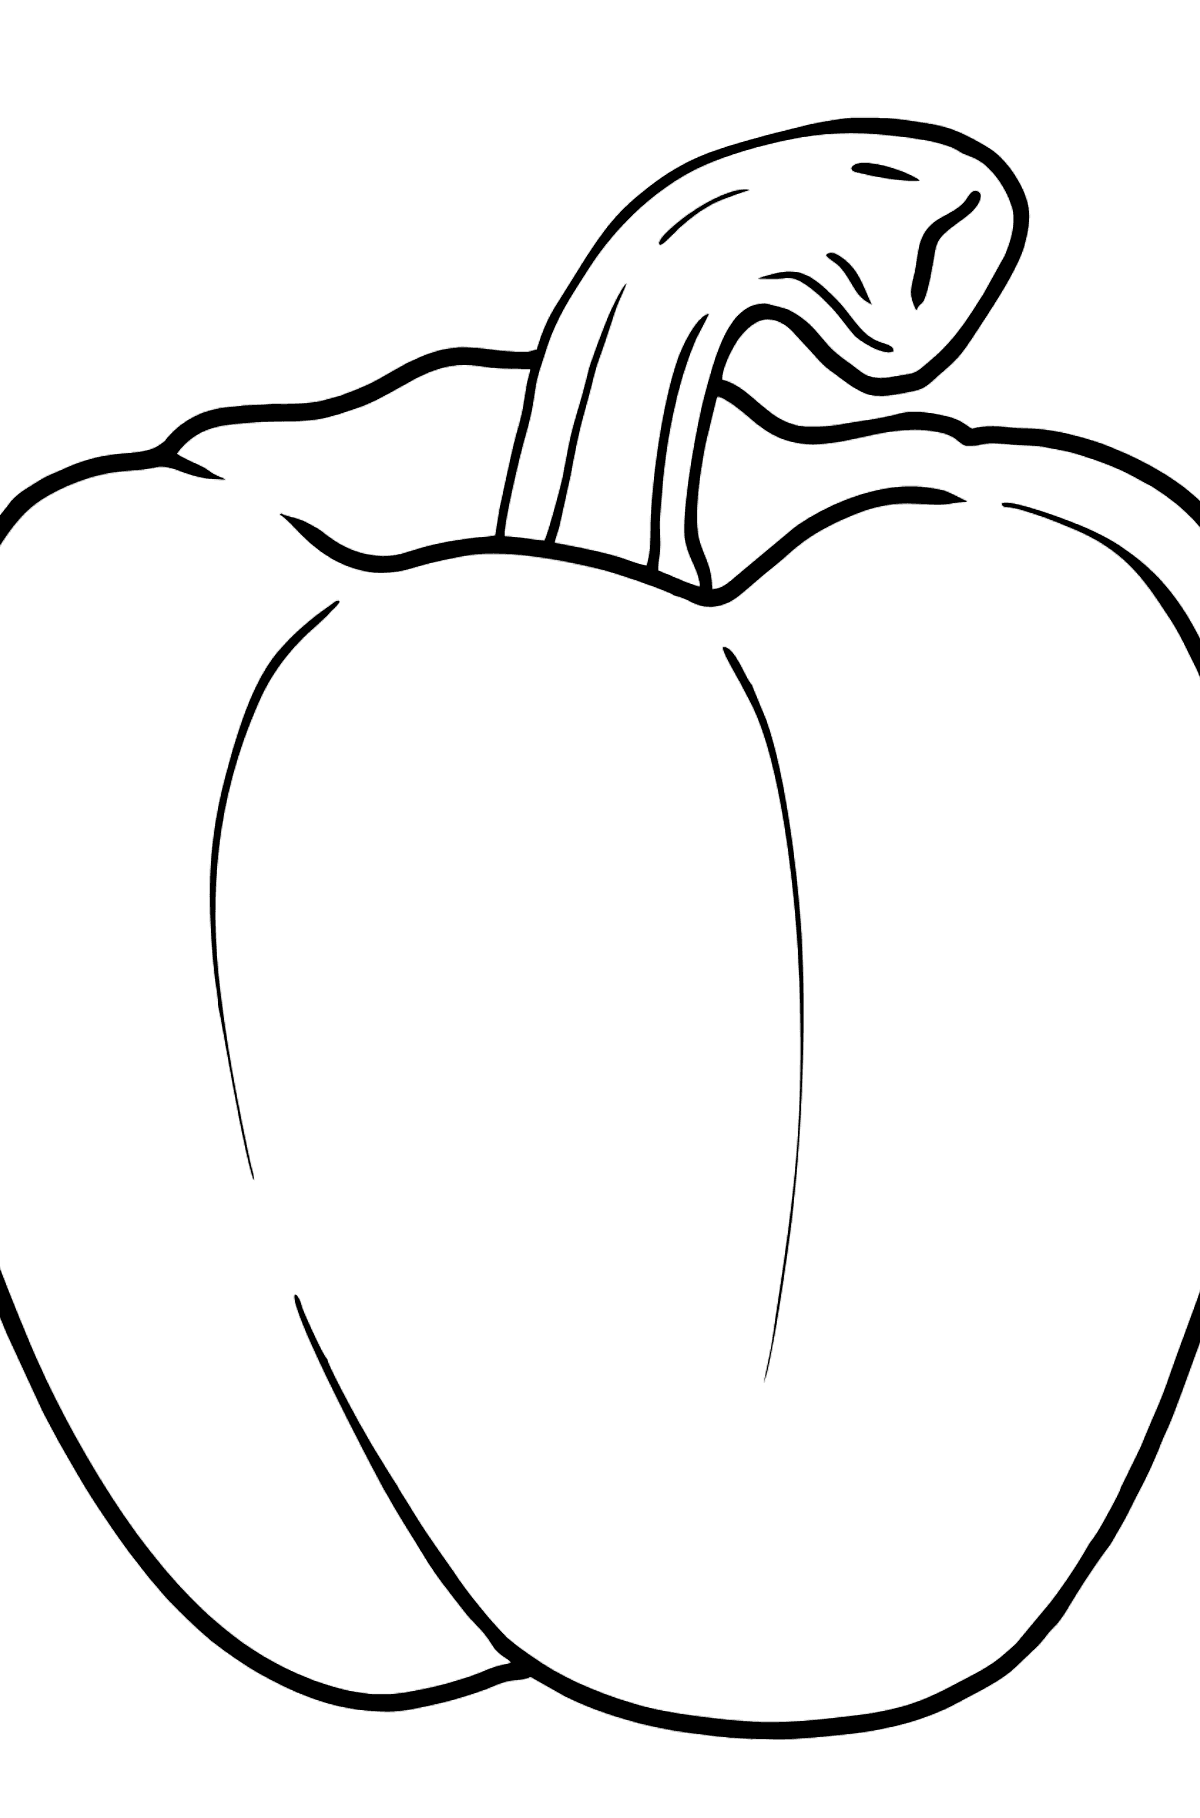 Pepper coloring page - Coloring Pages for Kids